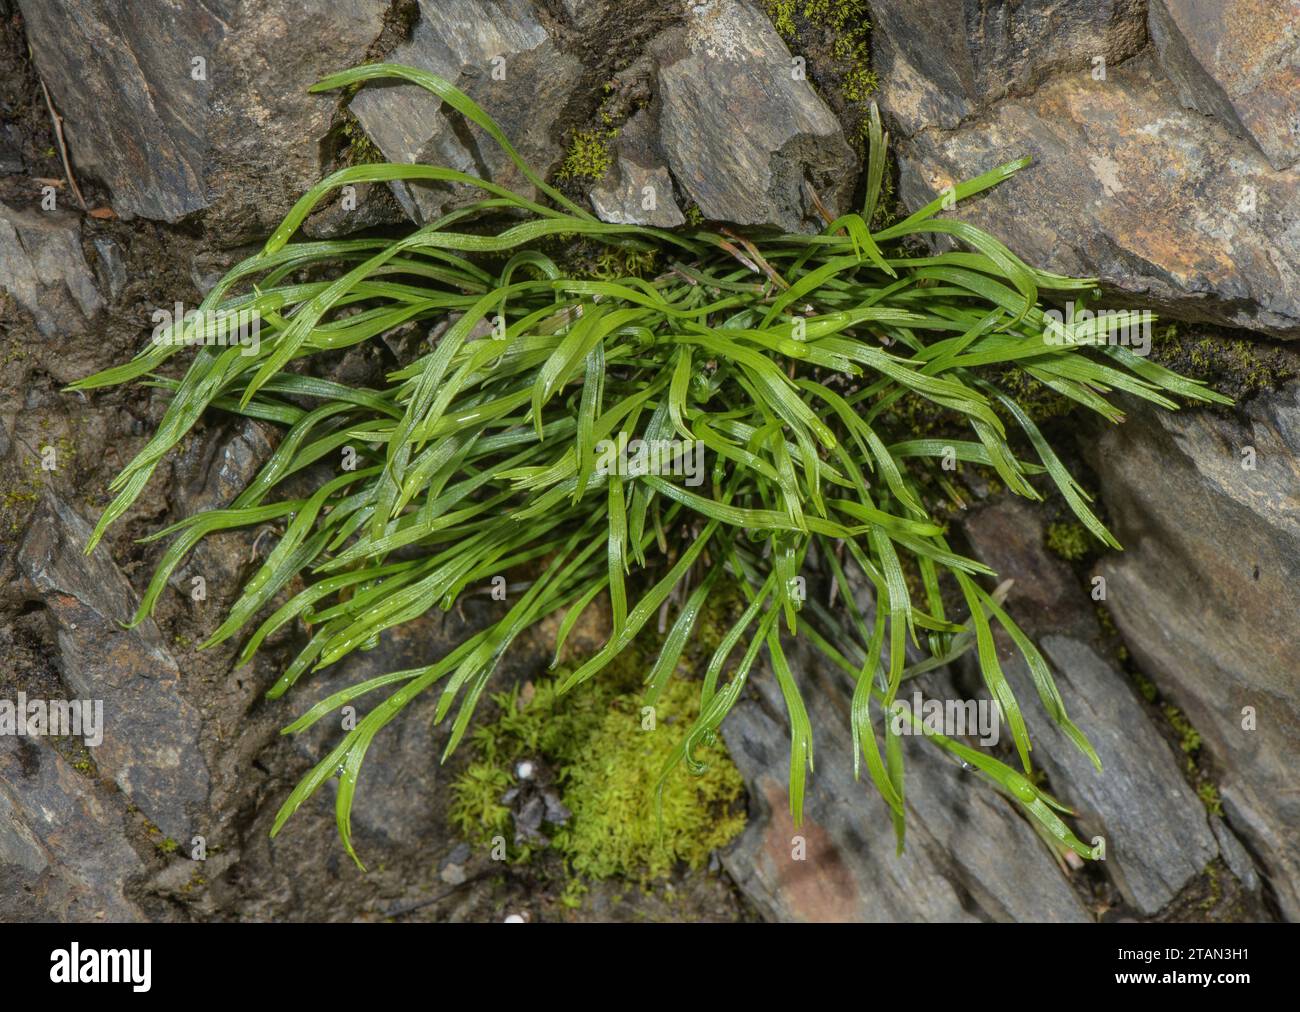 Clump of Forked Spleenwort, Asplenium septentrionale, fronds in old wall in the uplands. Stock Photo